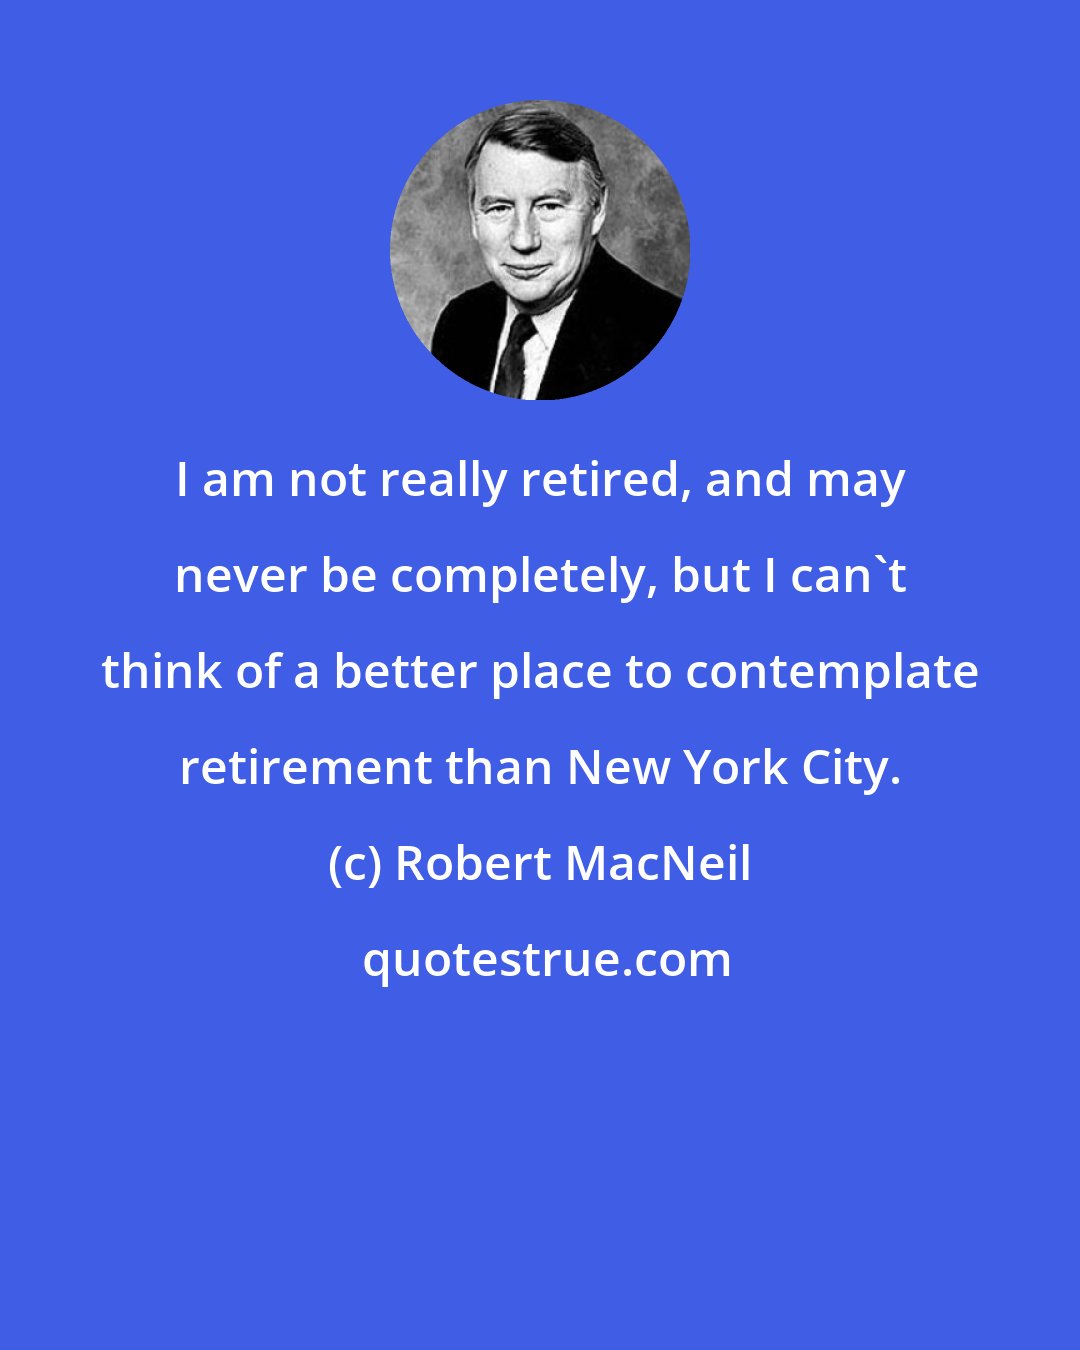 Robert MacNeil: I am not really retired, and may never be completely, but I can't think of a better place to contemplate retirement than New York City.